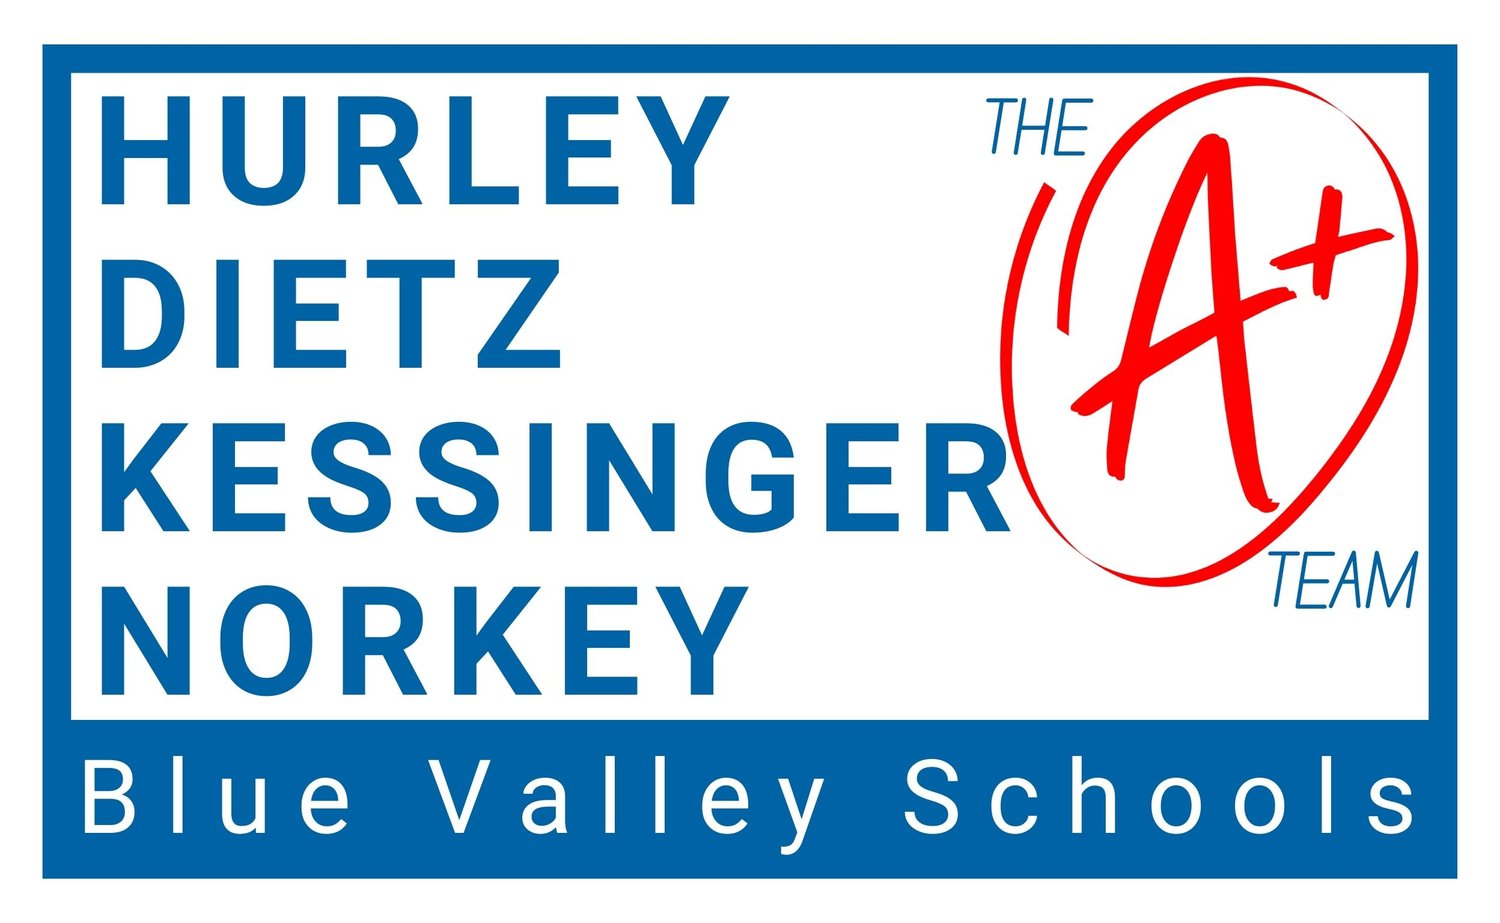 The A+ Team - Blue Valley Schools